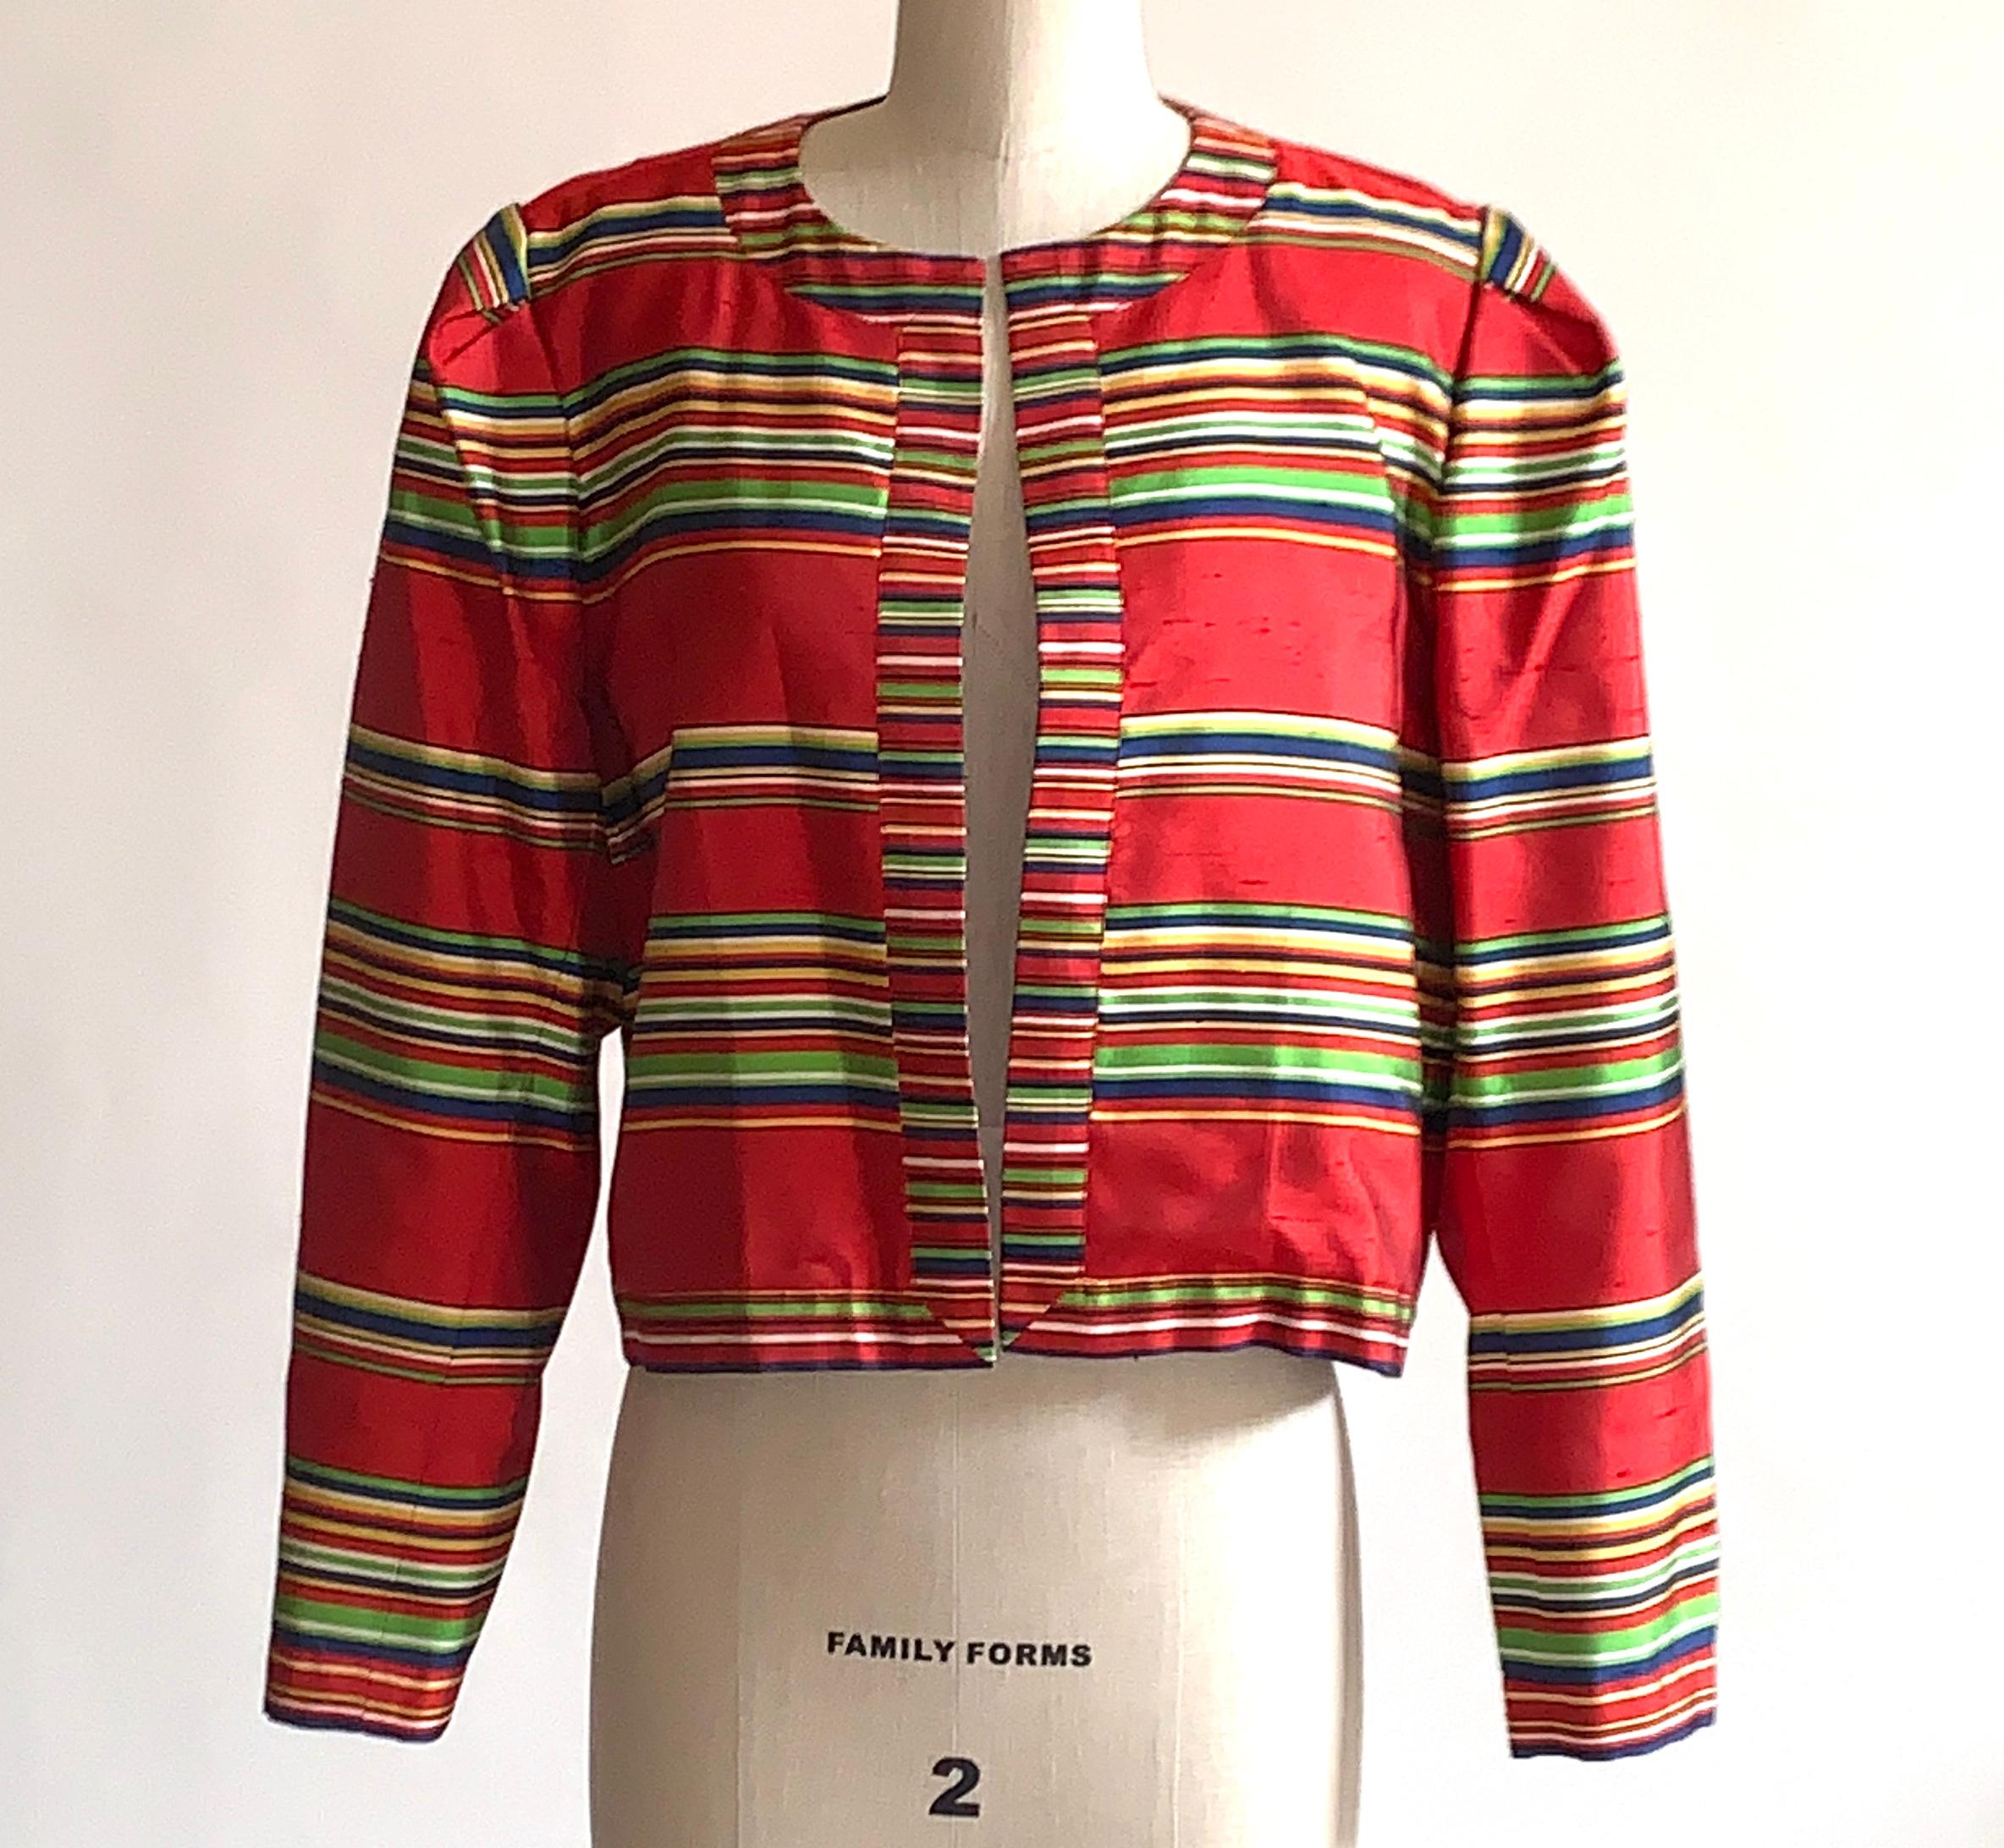 Yves Saint Laurent vintage Rive Gauche silk short jacket in red with yellow, green, blue and white stripes. Open front style. Slightly cropped with a puffed sleeve at shoulder (produced by pleating, no shoulder pads.) Beautiful natural silk slub